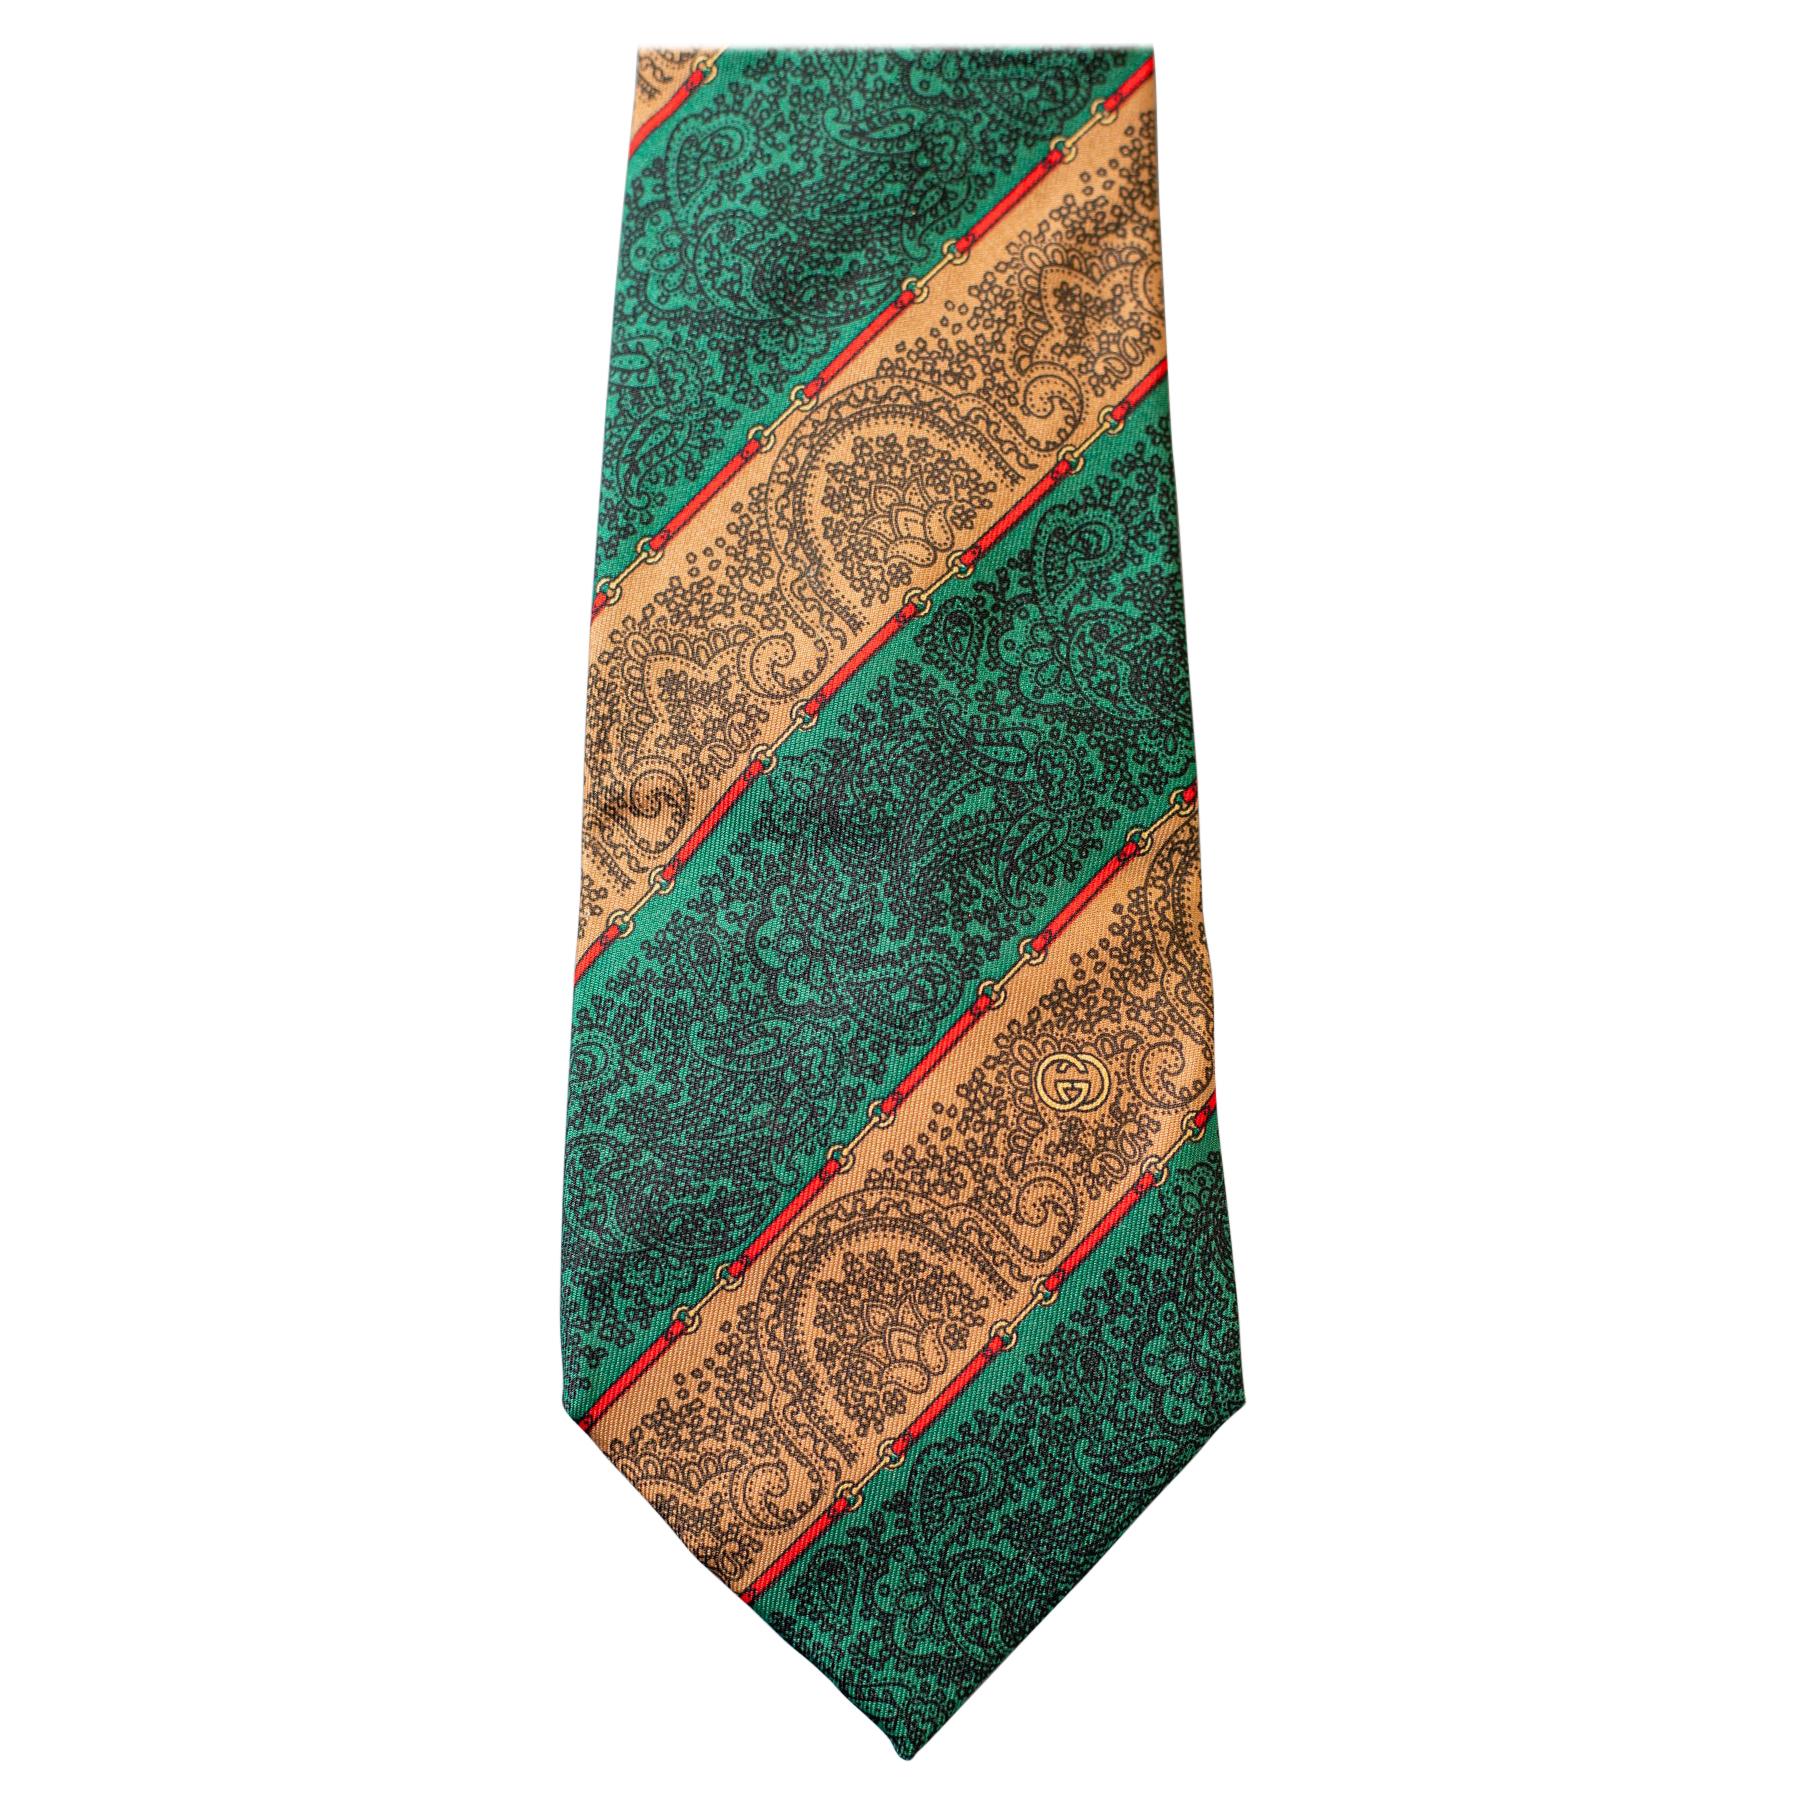 Vintage Gucci all-silk tie with paisley motif